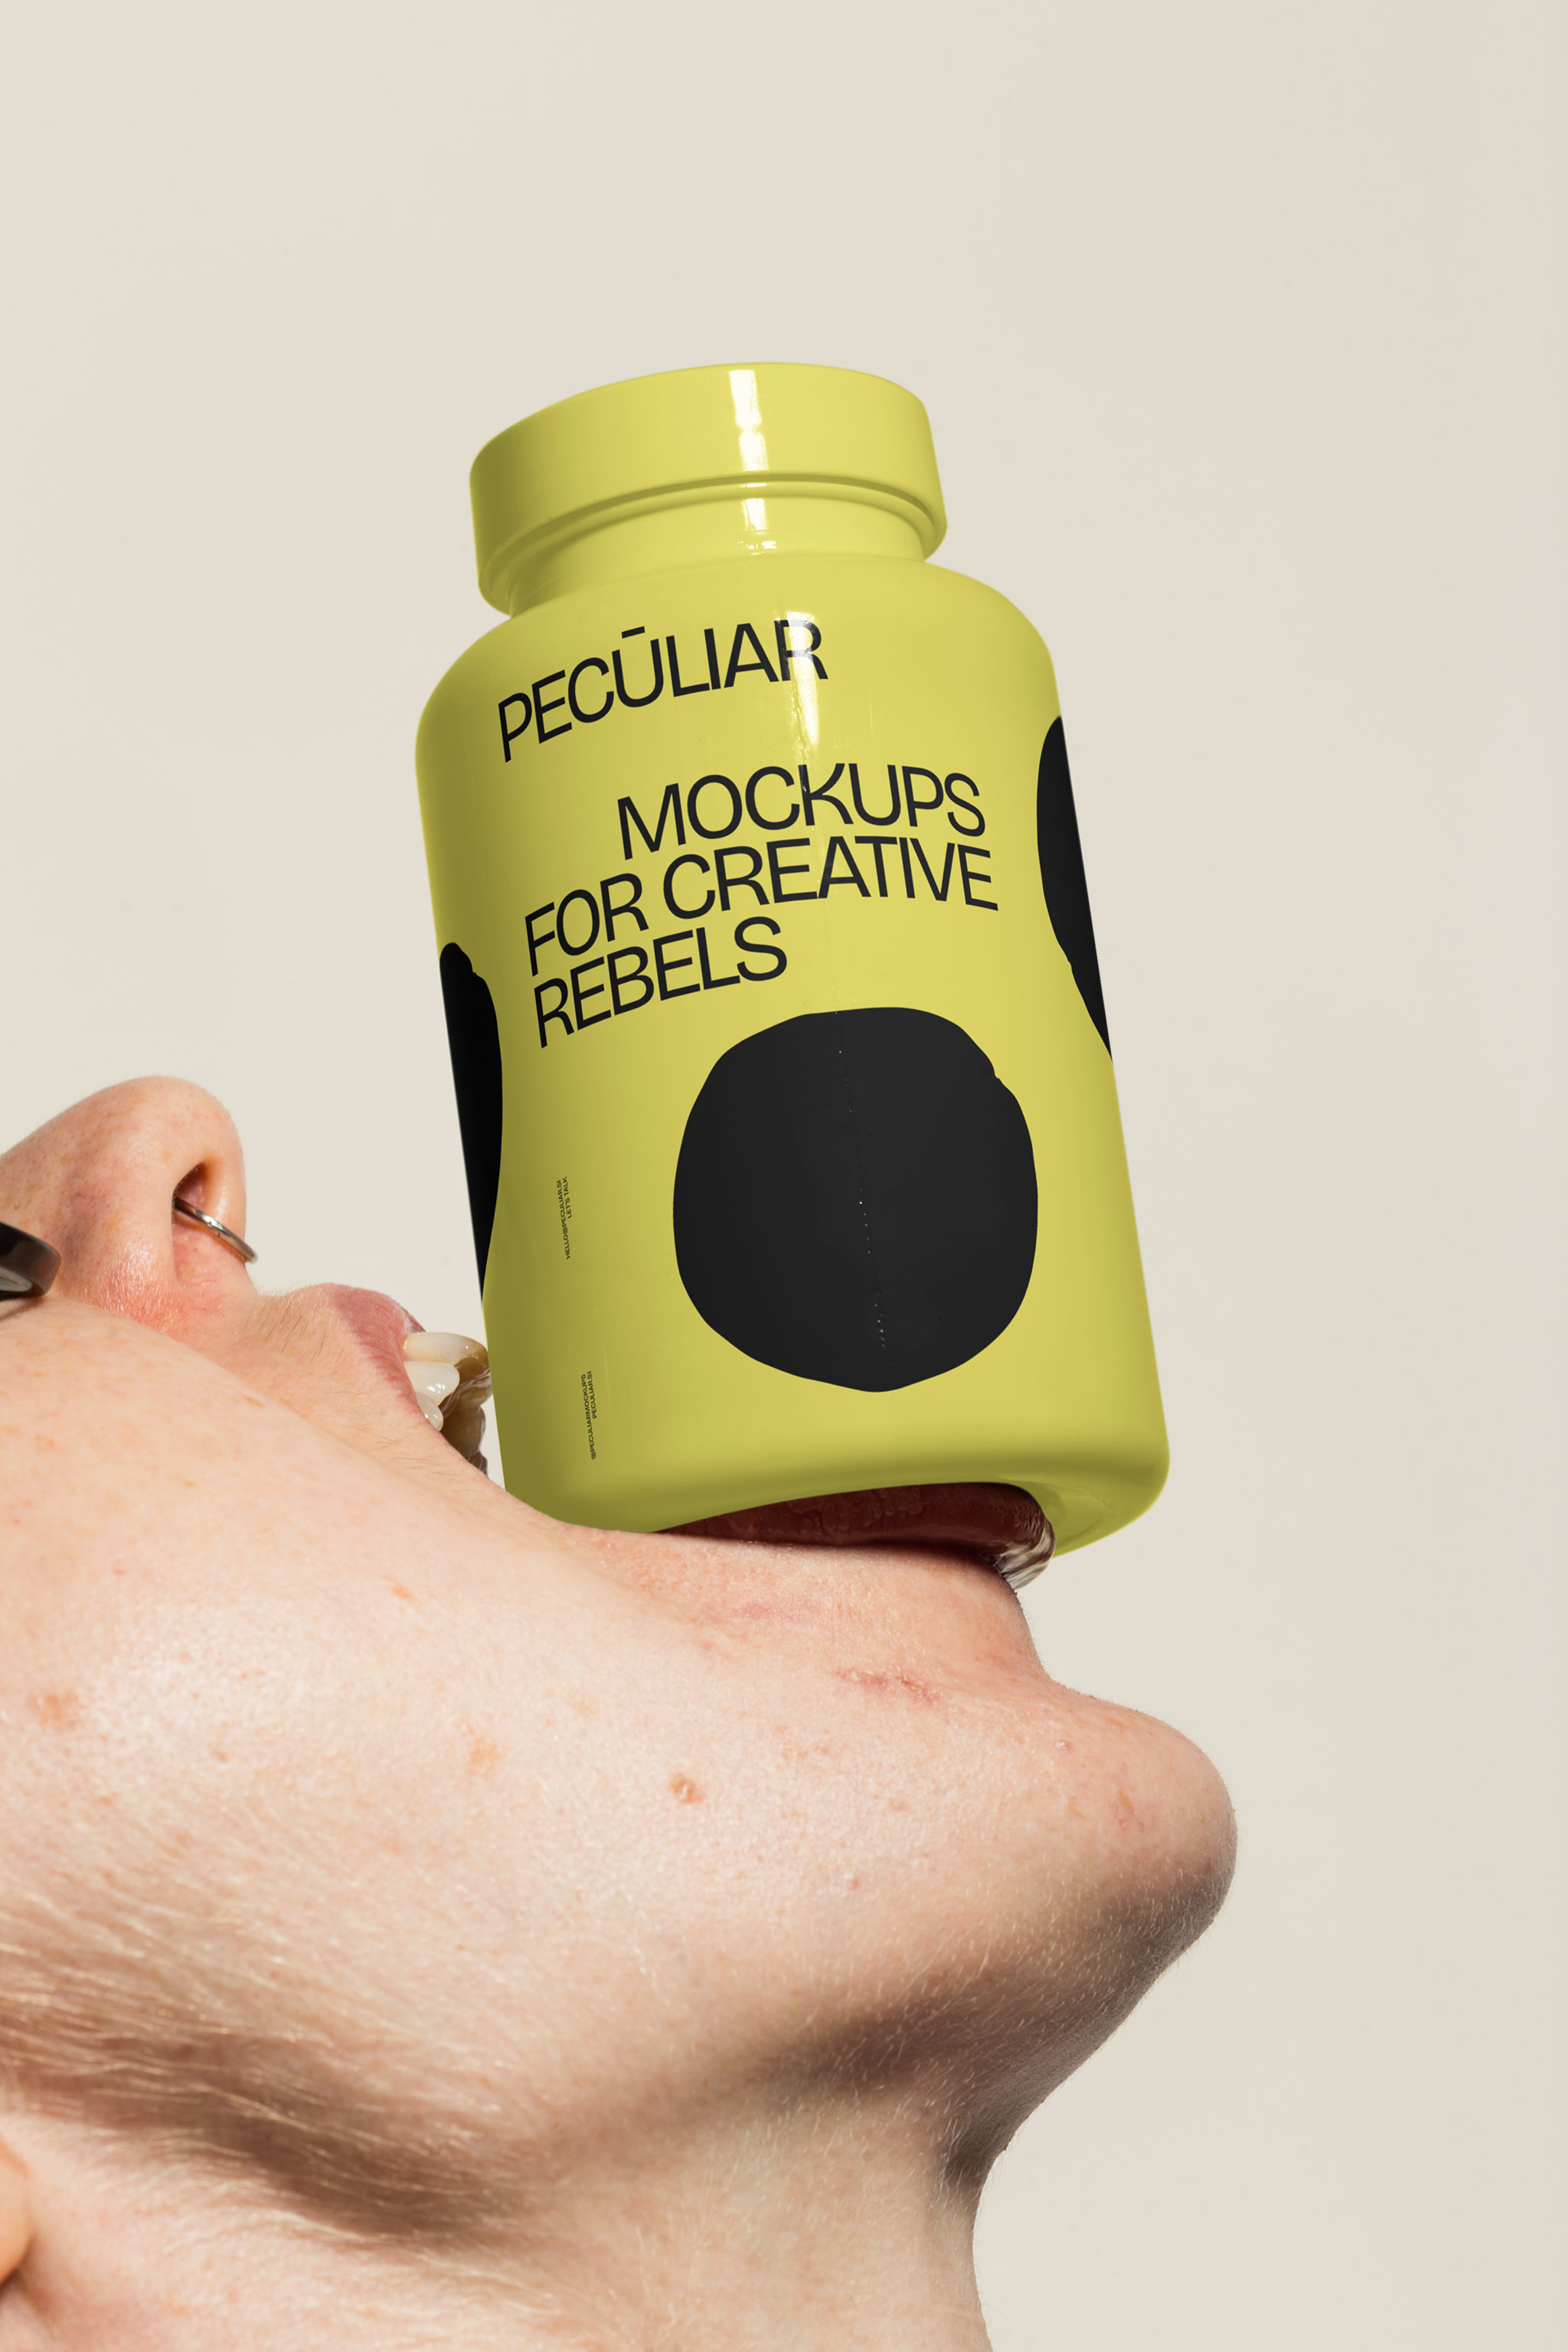 Close-up mockup of a person's face holding up a pill bottle with their mouth, in use example.